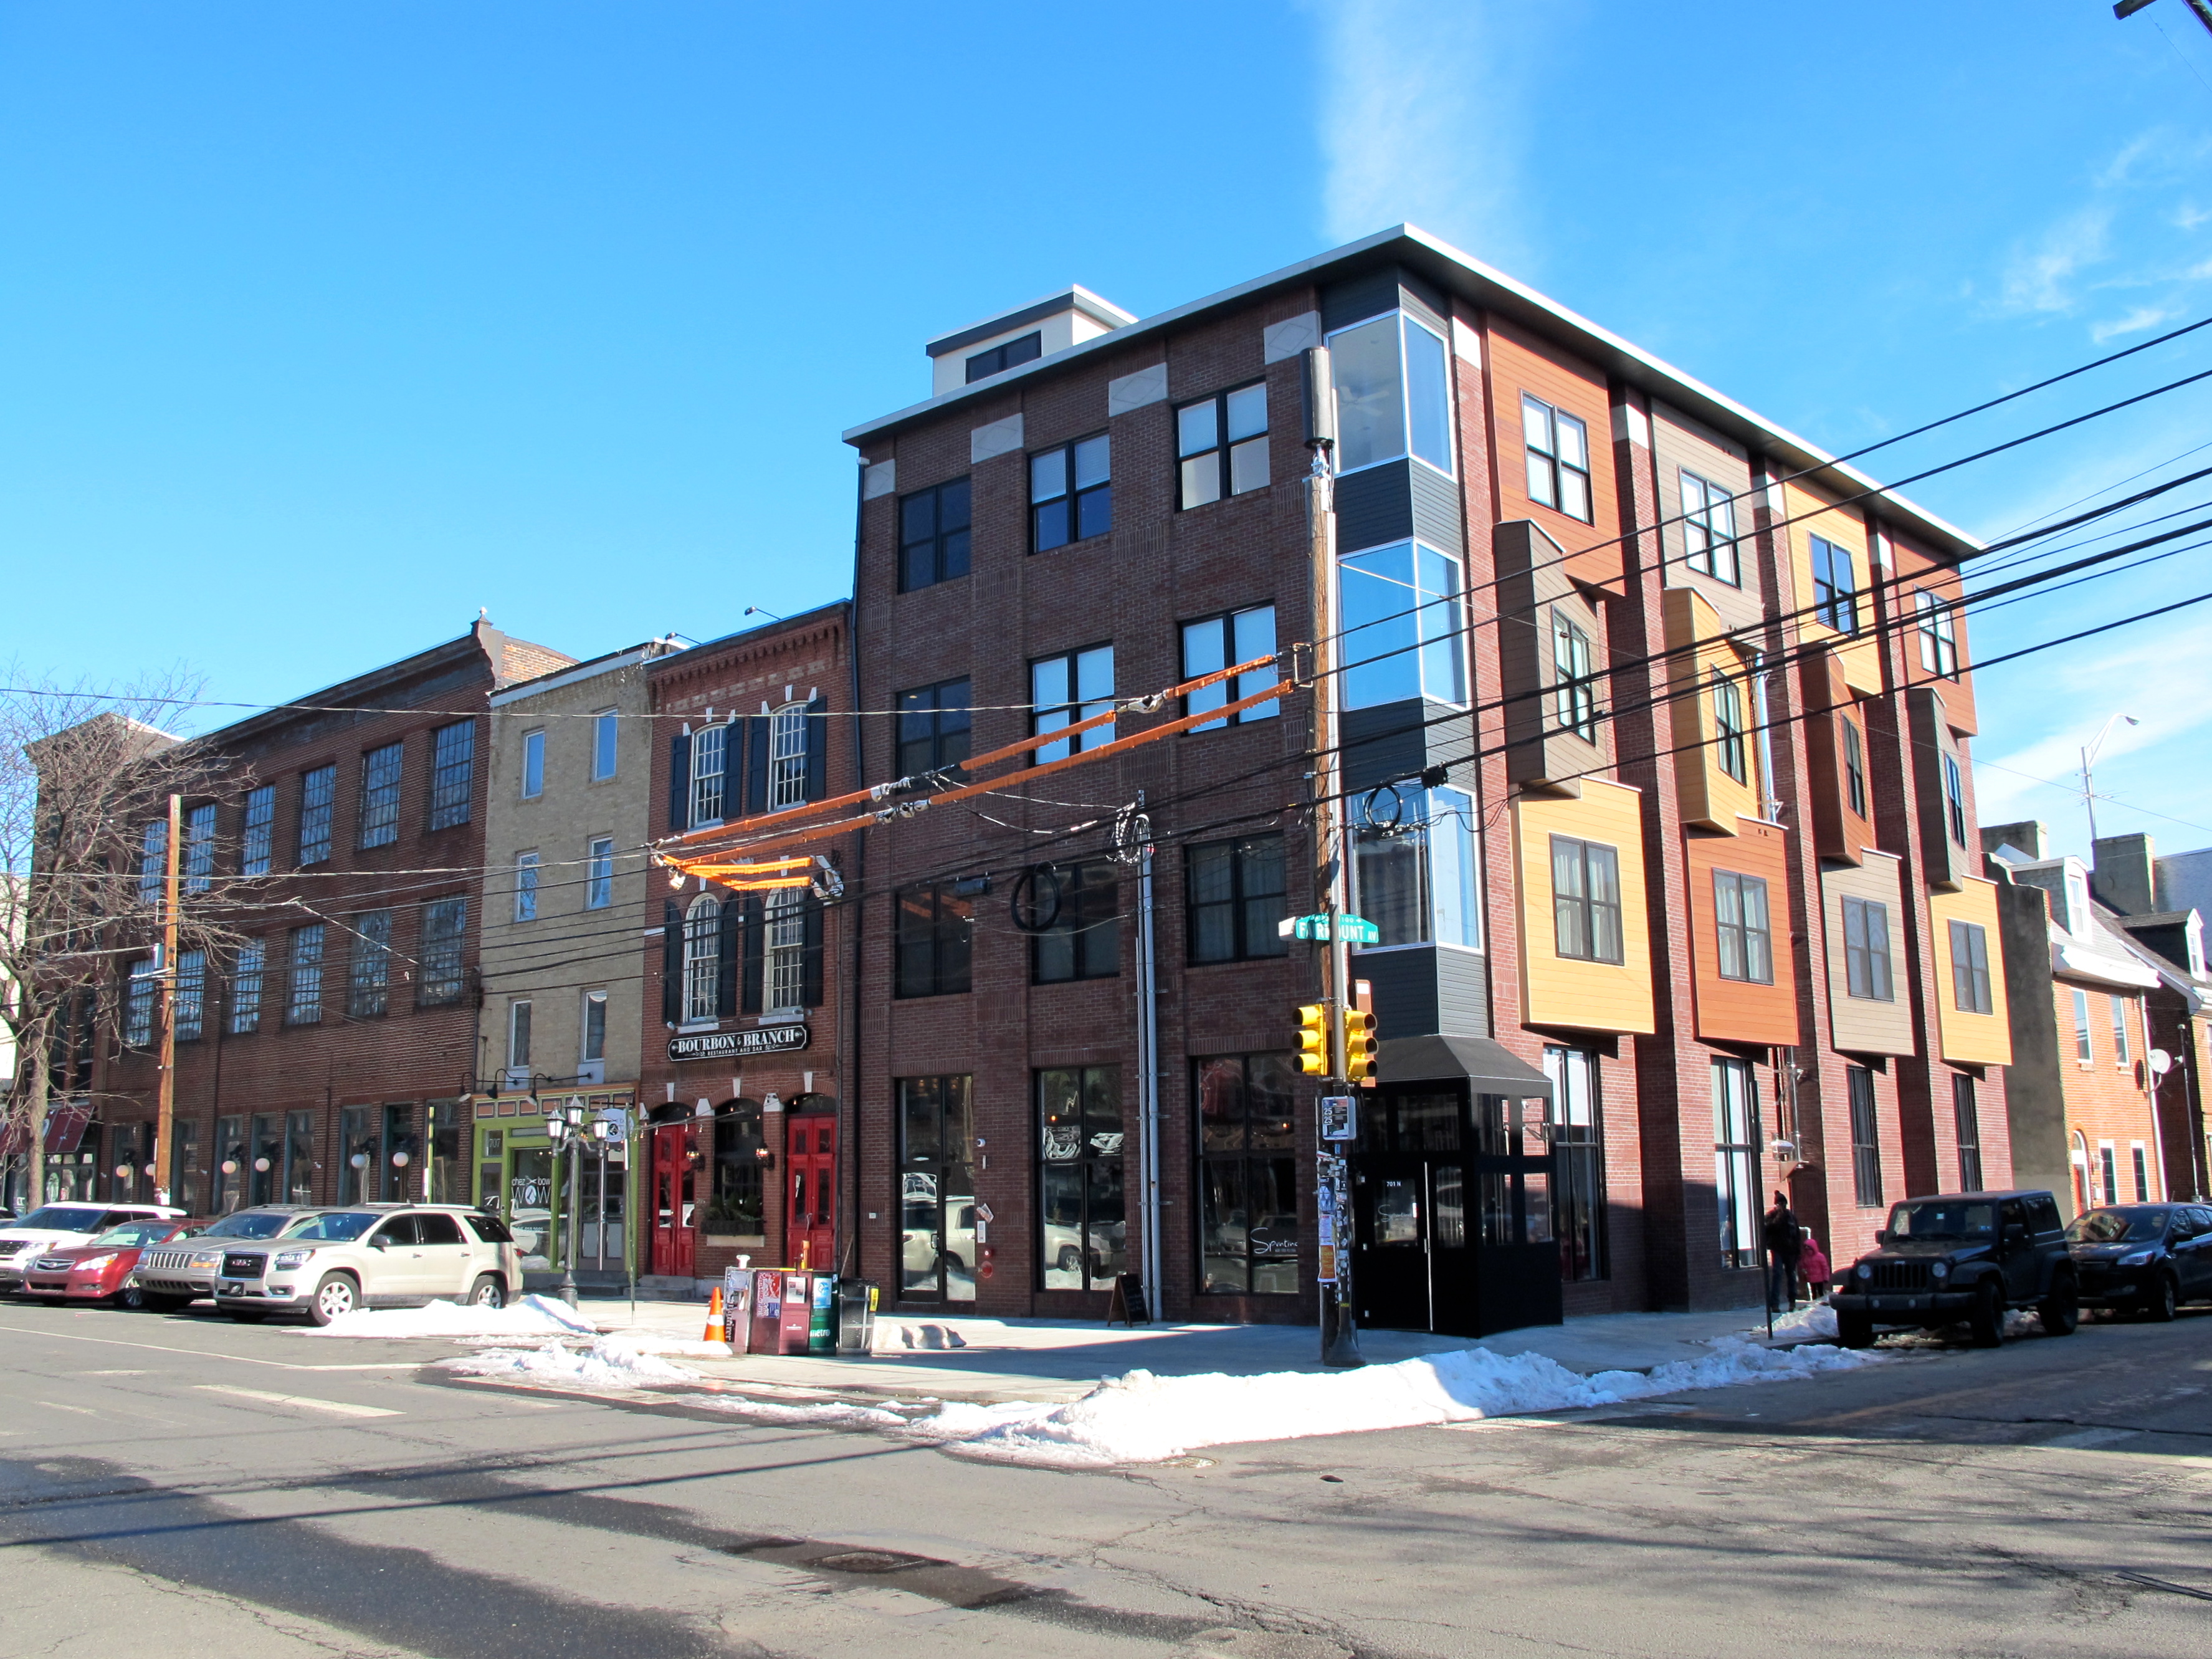 Mixed-use infill on North 2nd Street, Northern Liberties, January 2016